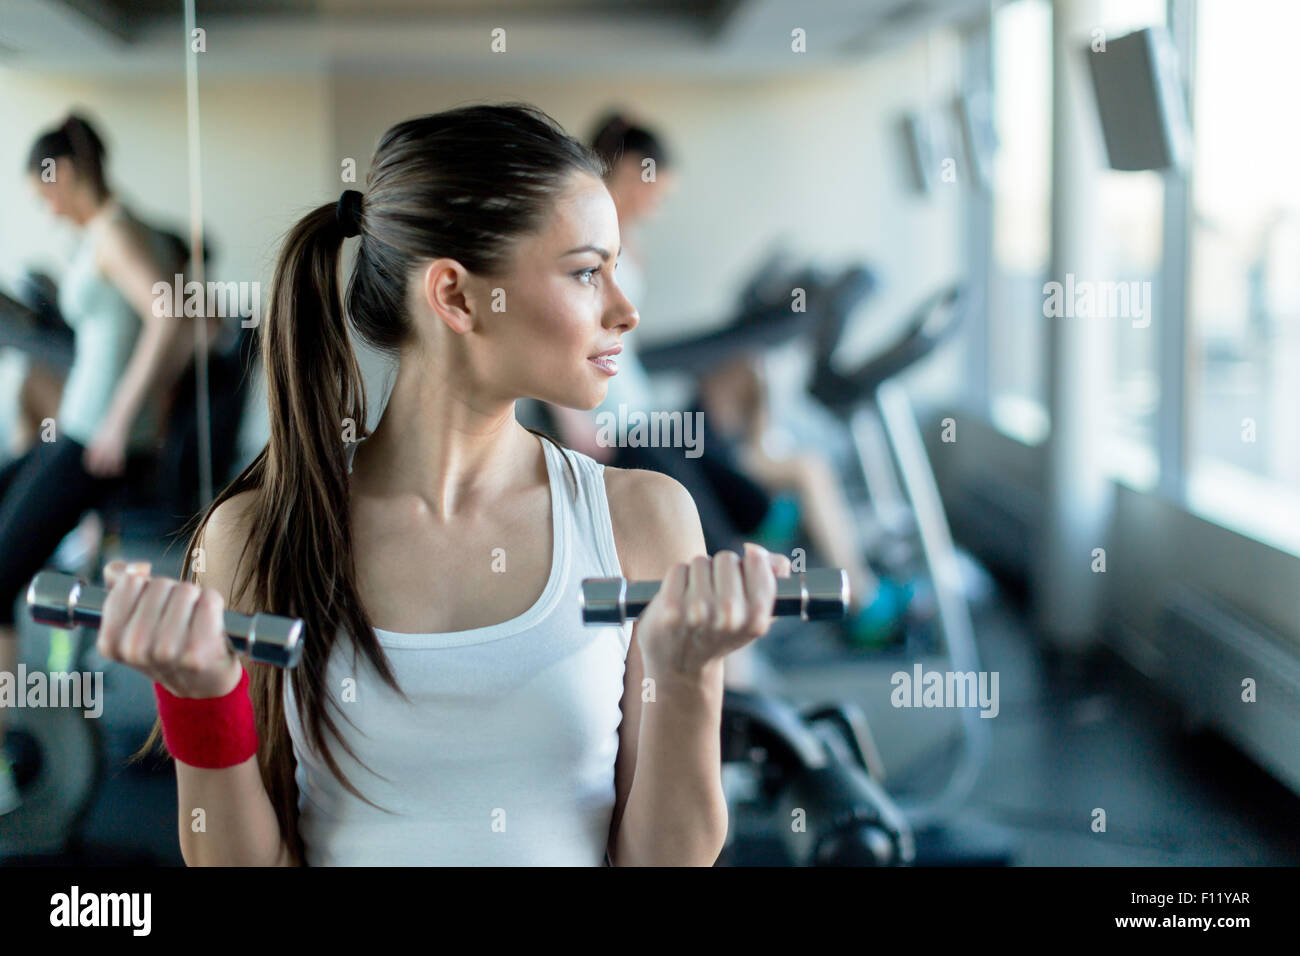 Beautiful, young woman lifting weights in a gym standing next to a mirror Stock Photo